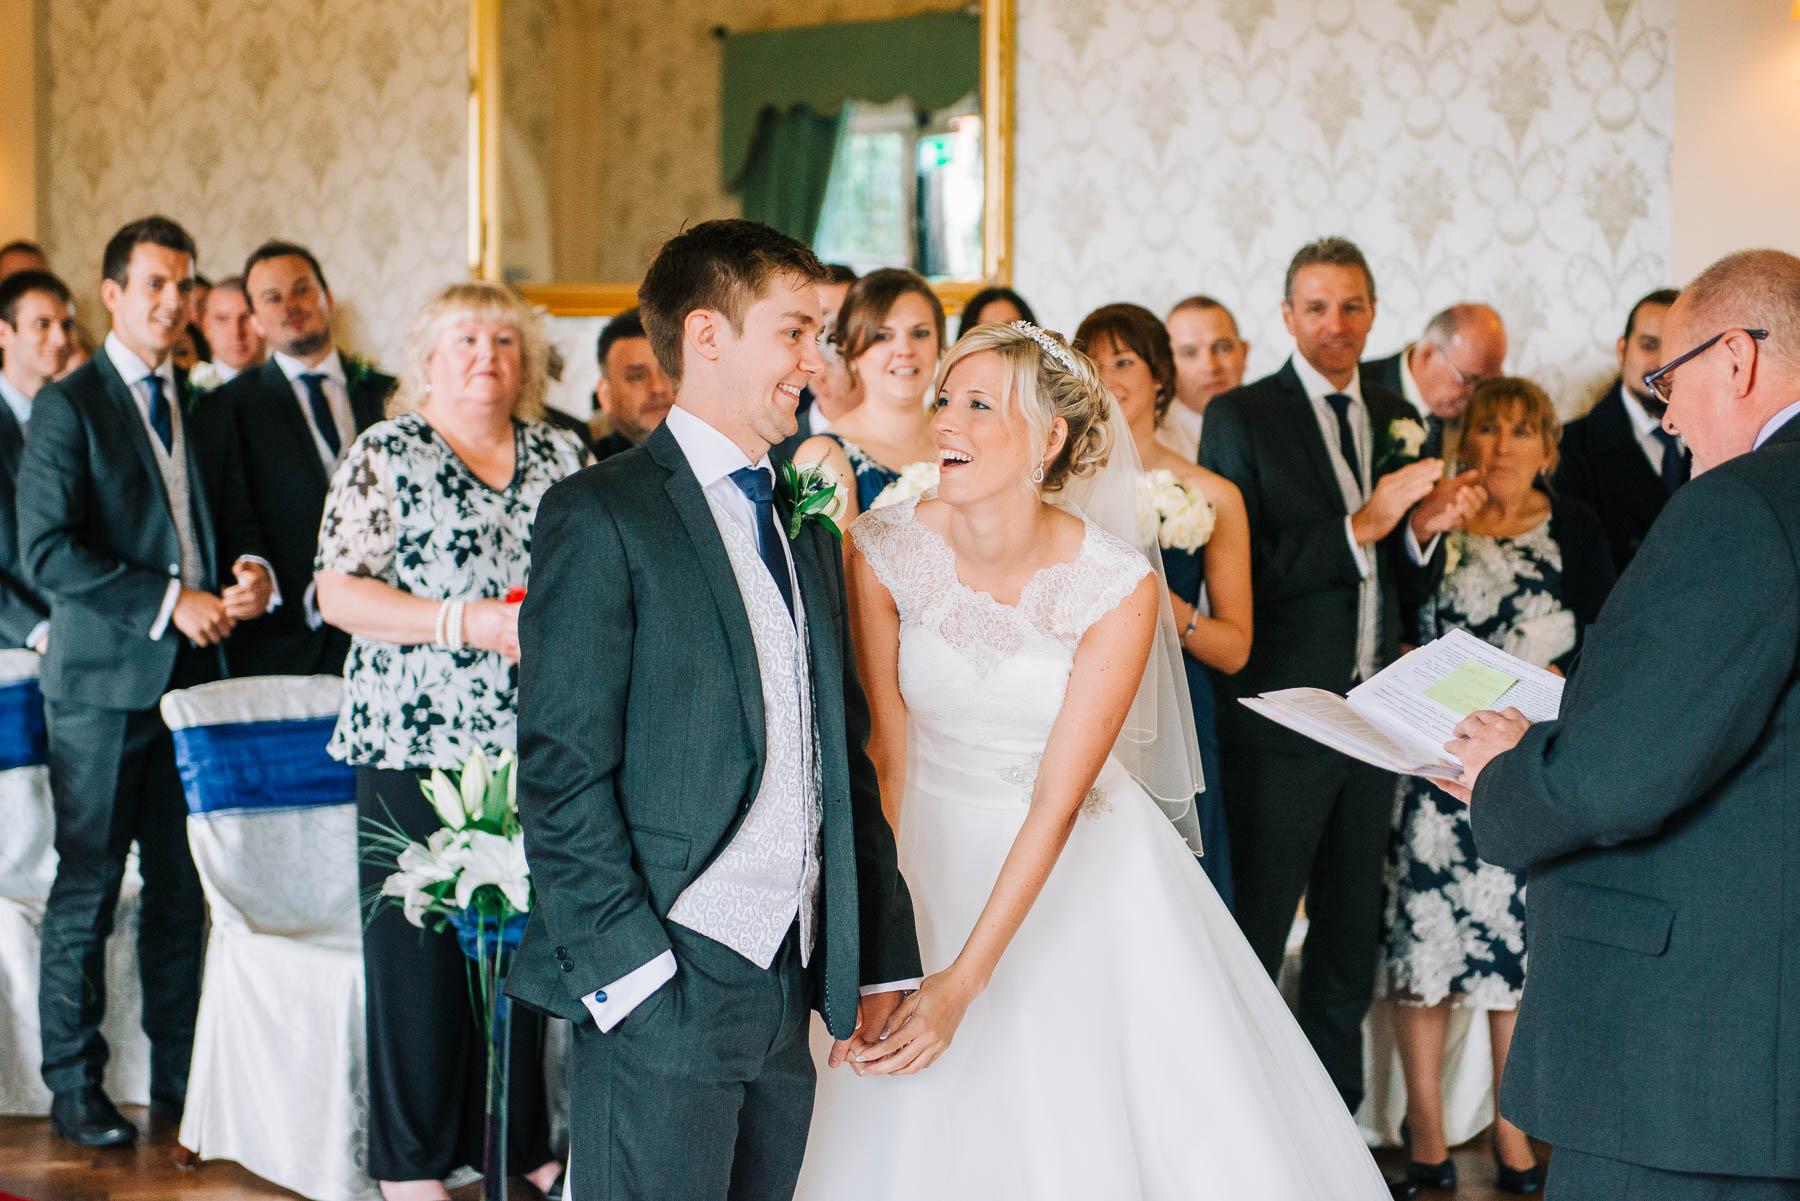 Natural Candid Rugby Wedding Photographer Dunchurch Park